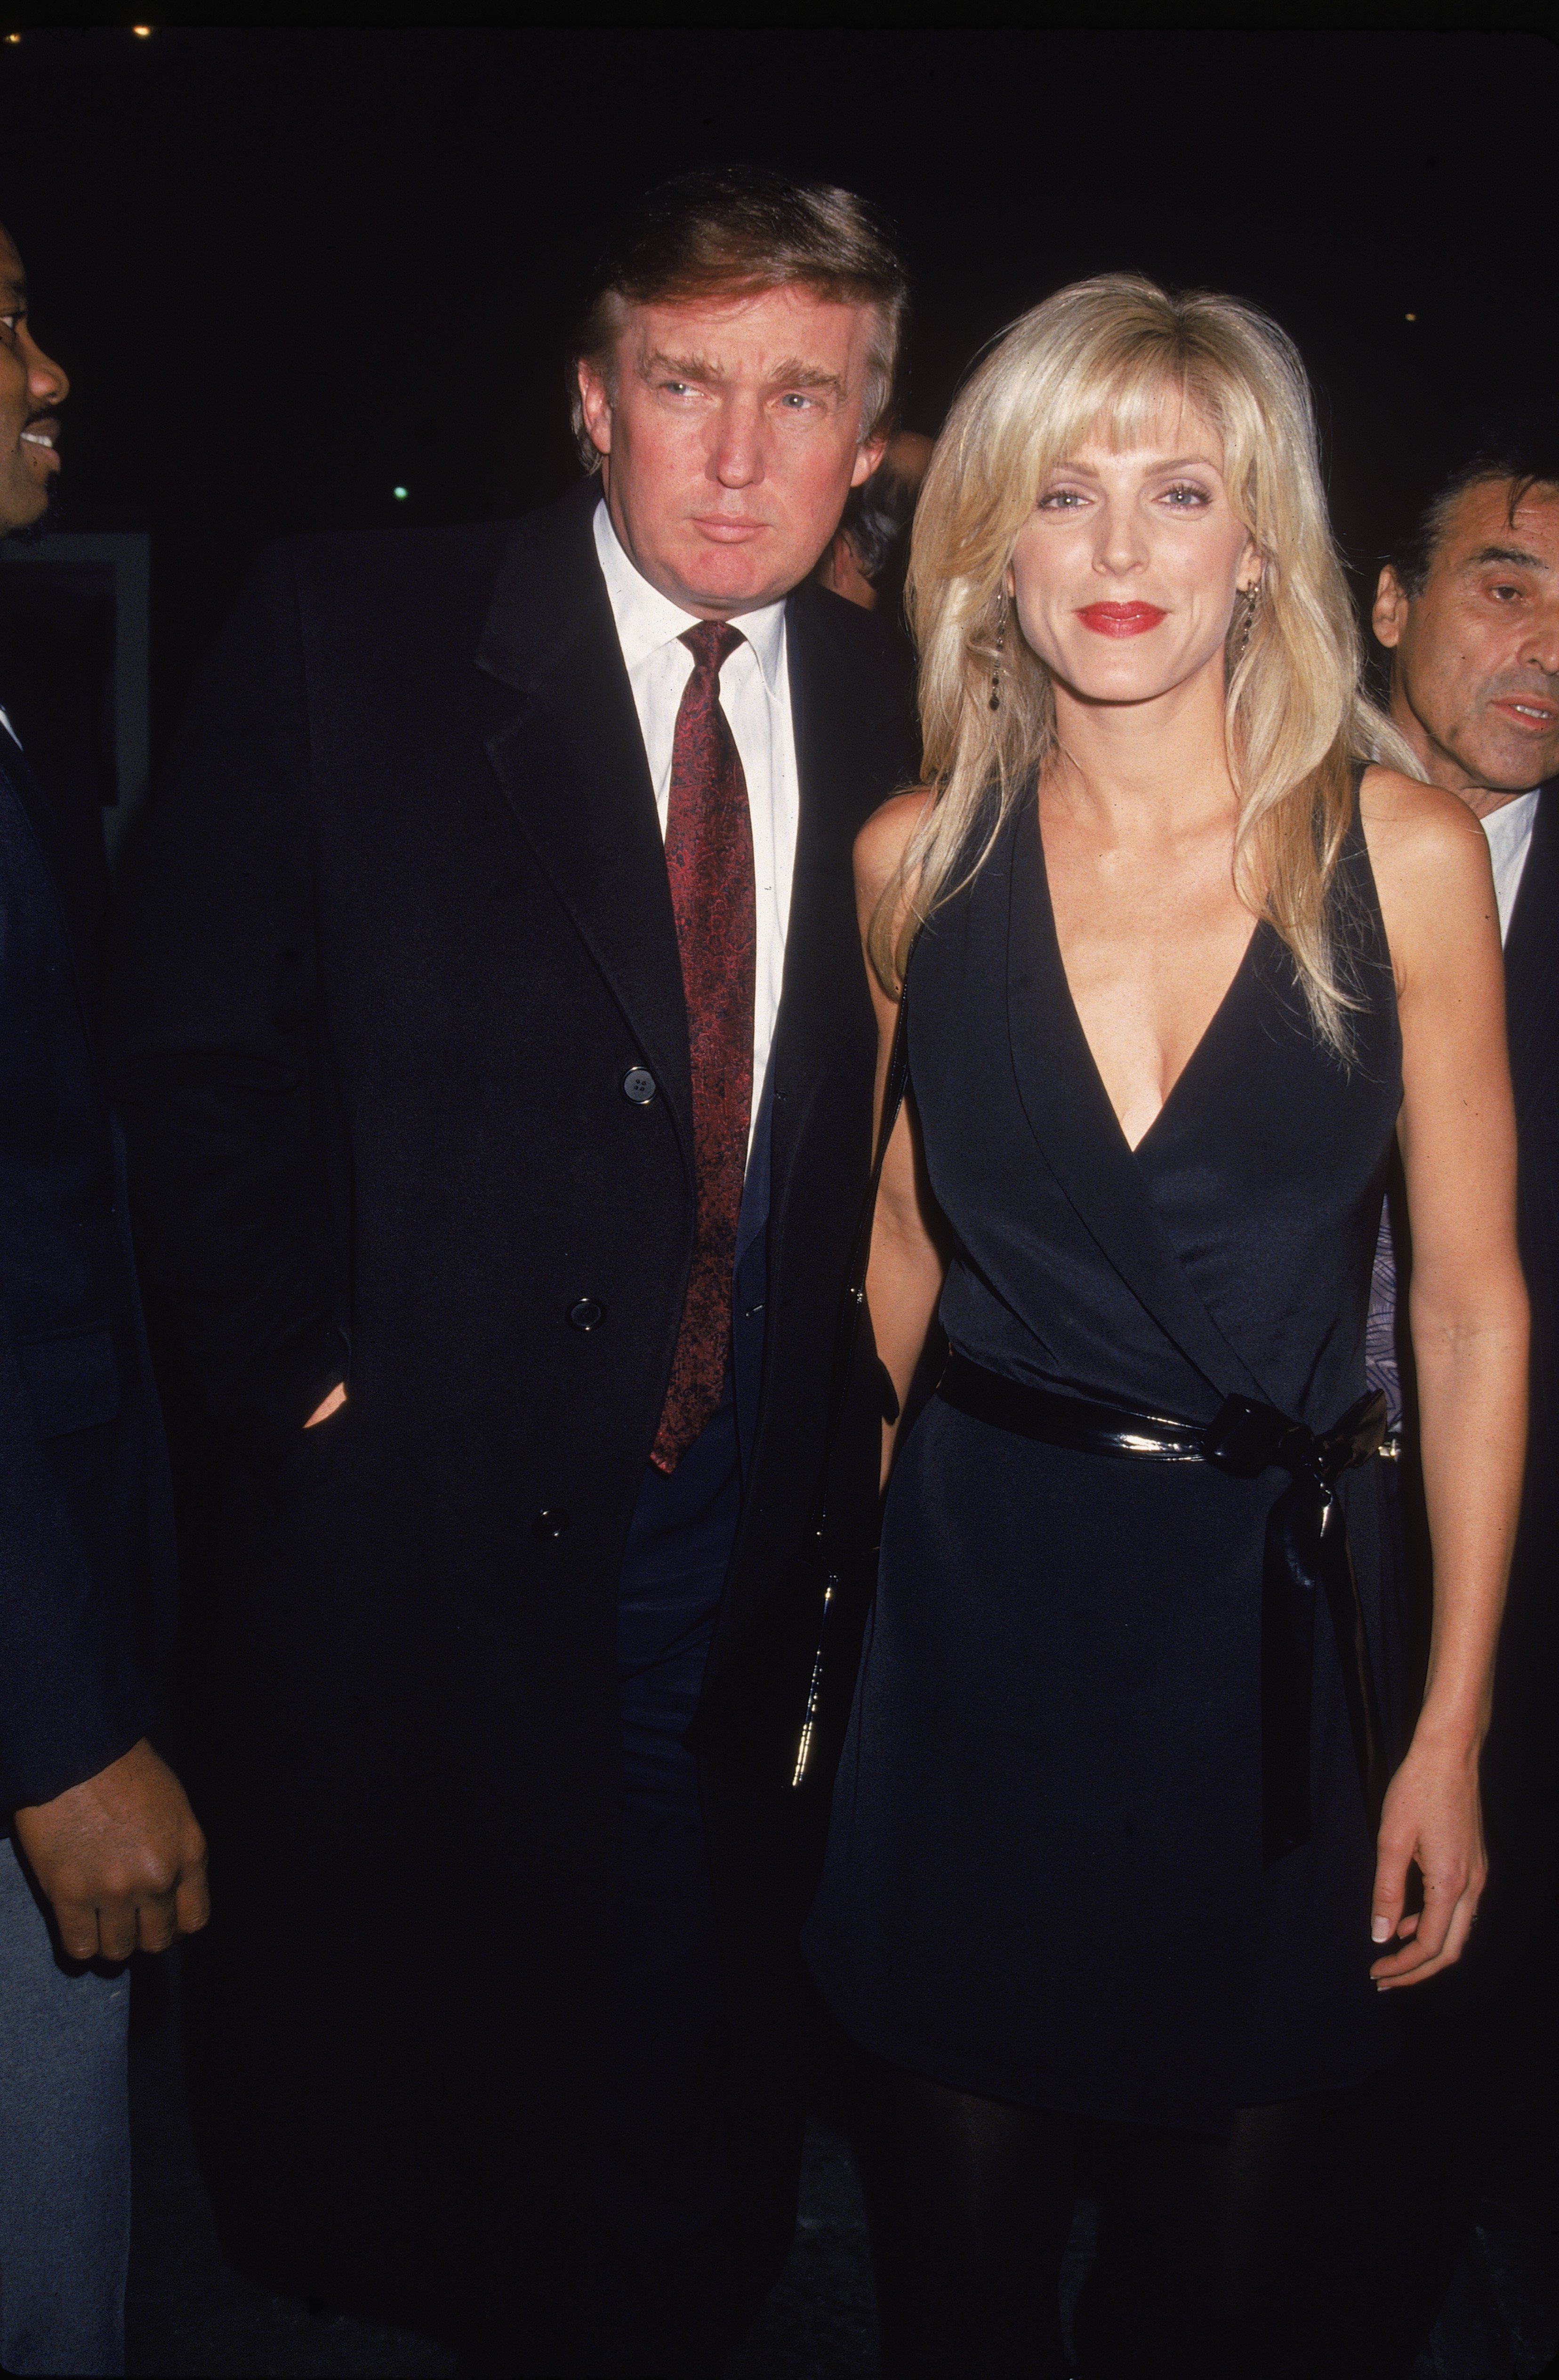 Donald Trump and Marla Maples at the premiere of the film, 'Nell,' New York City, May 1994 | Photo: GettyImages